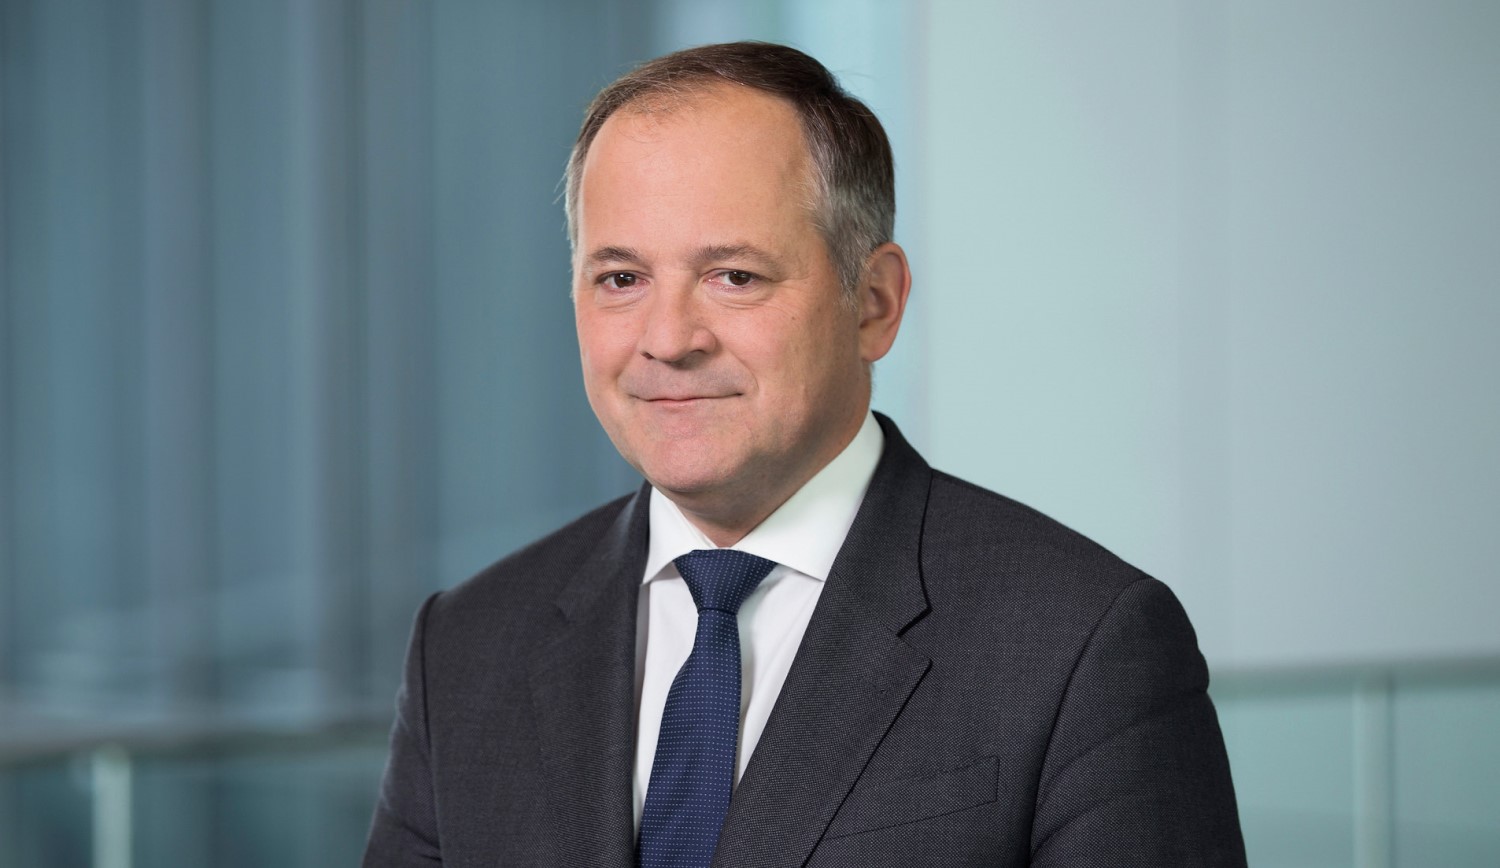 ECB’s Benoit Coeure To Lead Central Banking Digital Currency Initiative